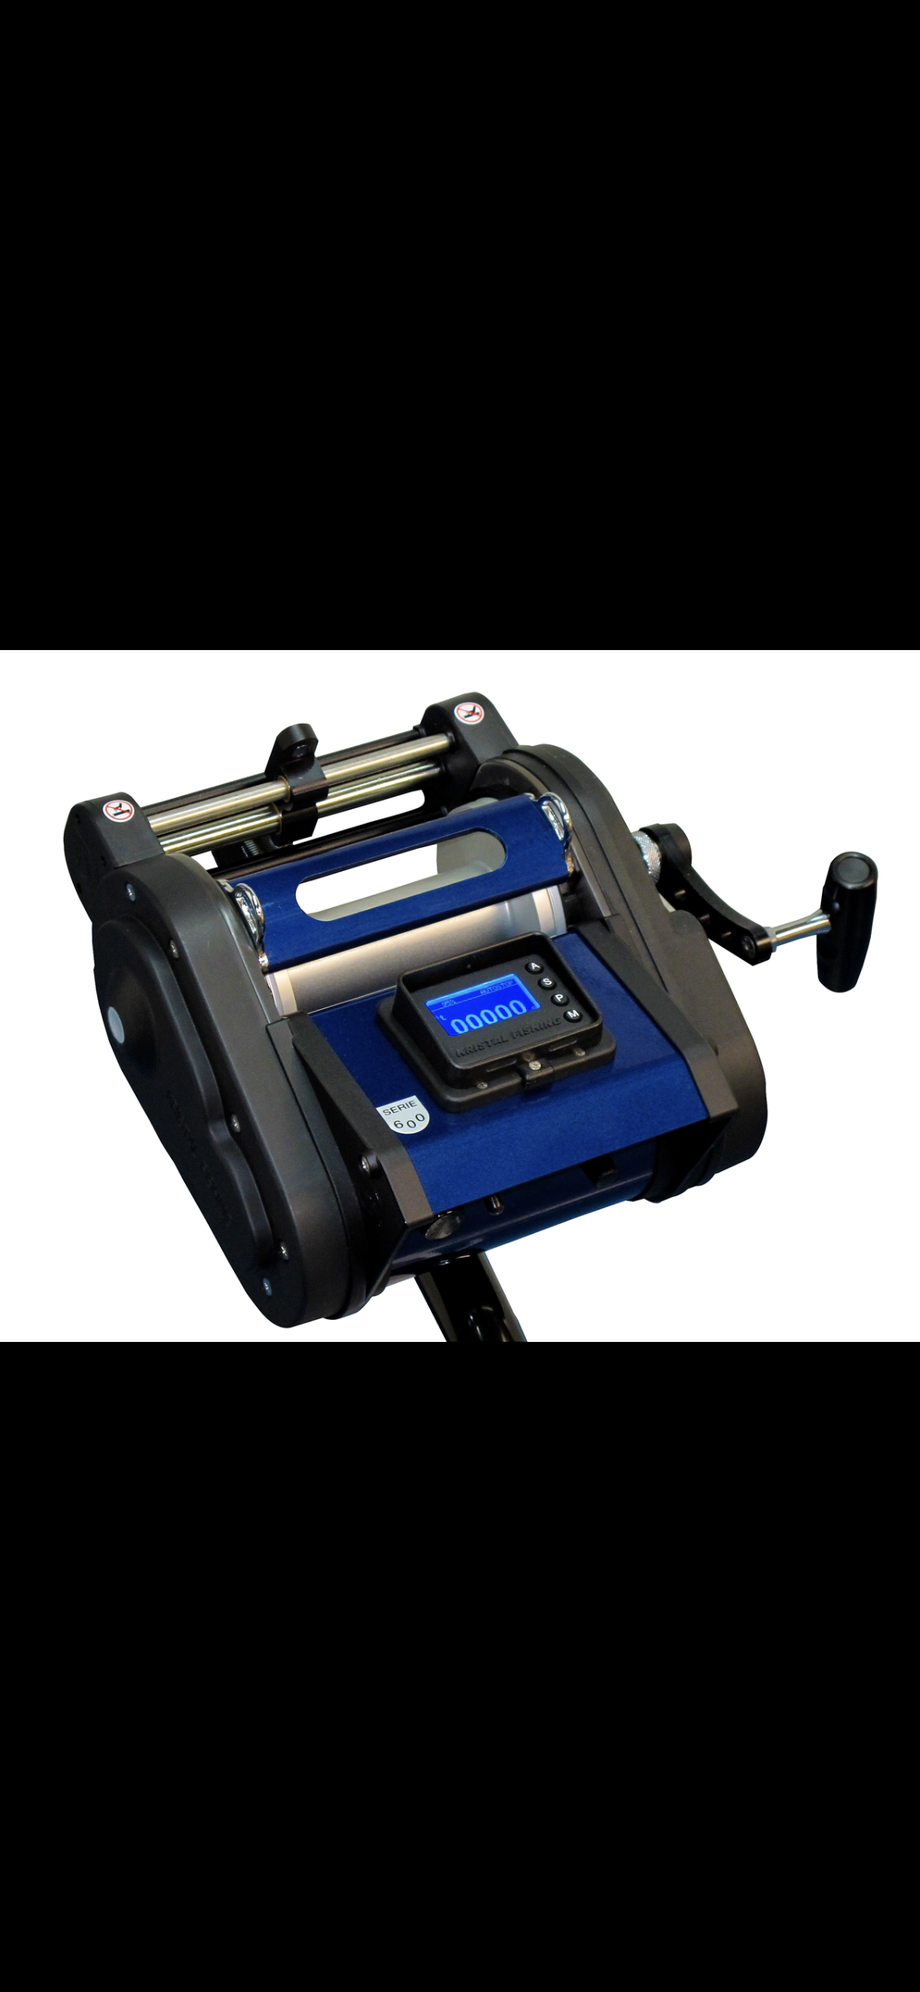 Kristal XL 655 Electric Reel - The Hull Truth - Boating and